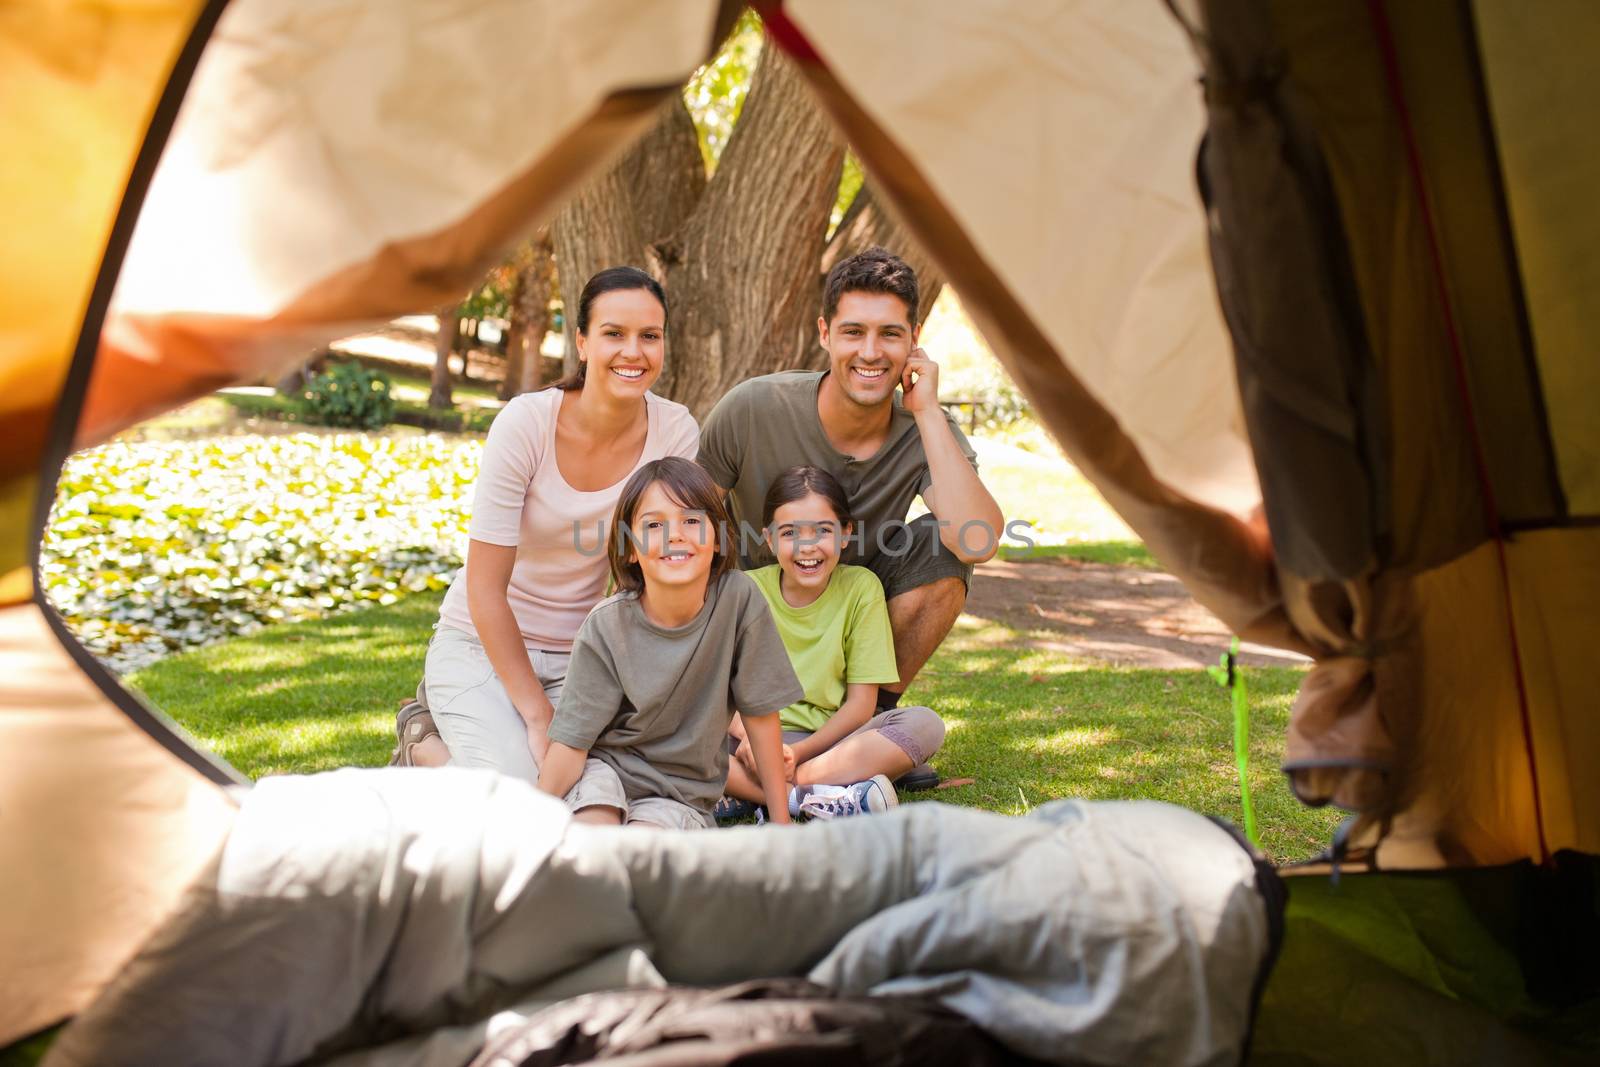 Joyful family camping in the park during the summer